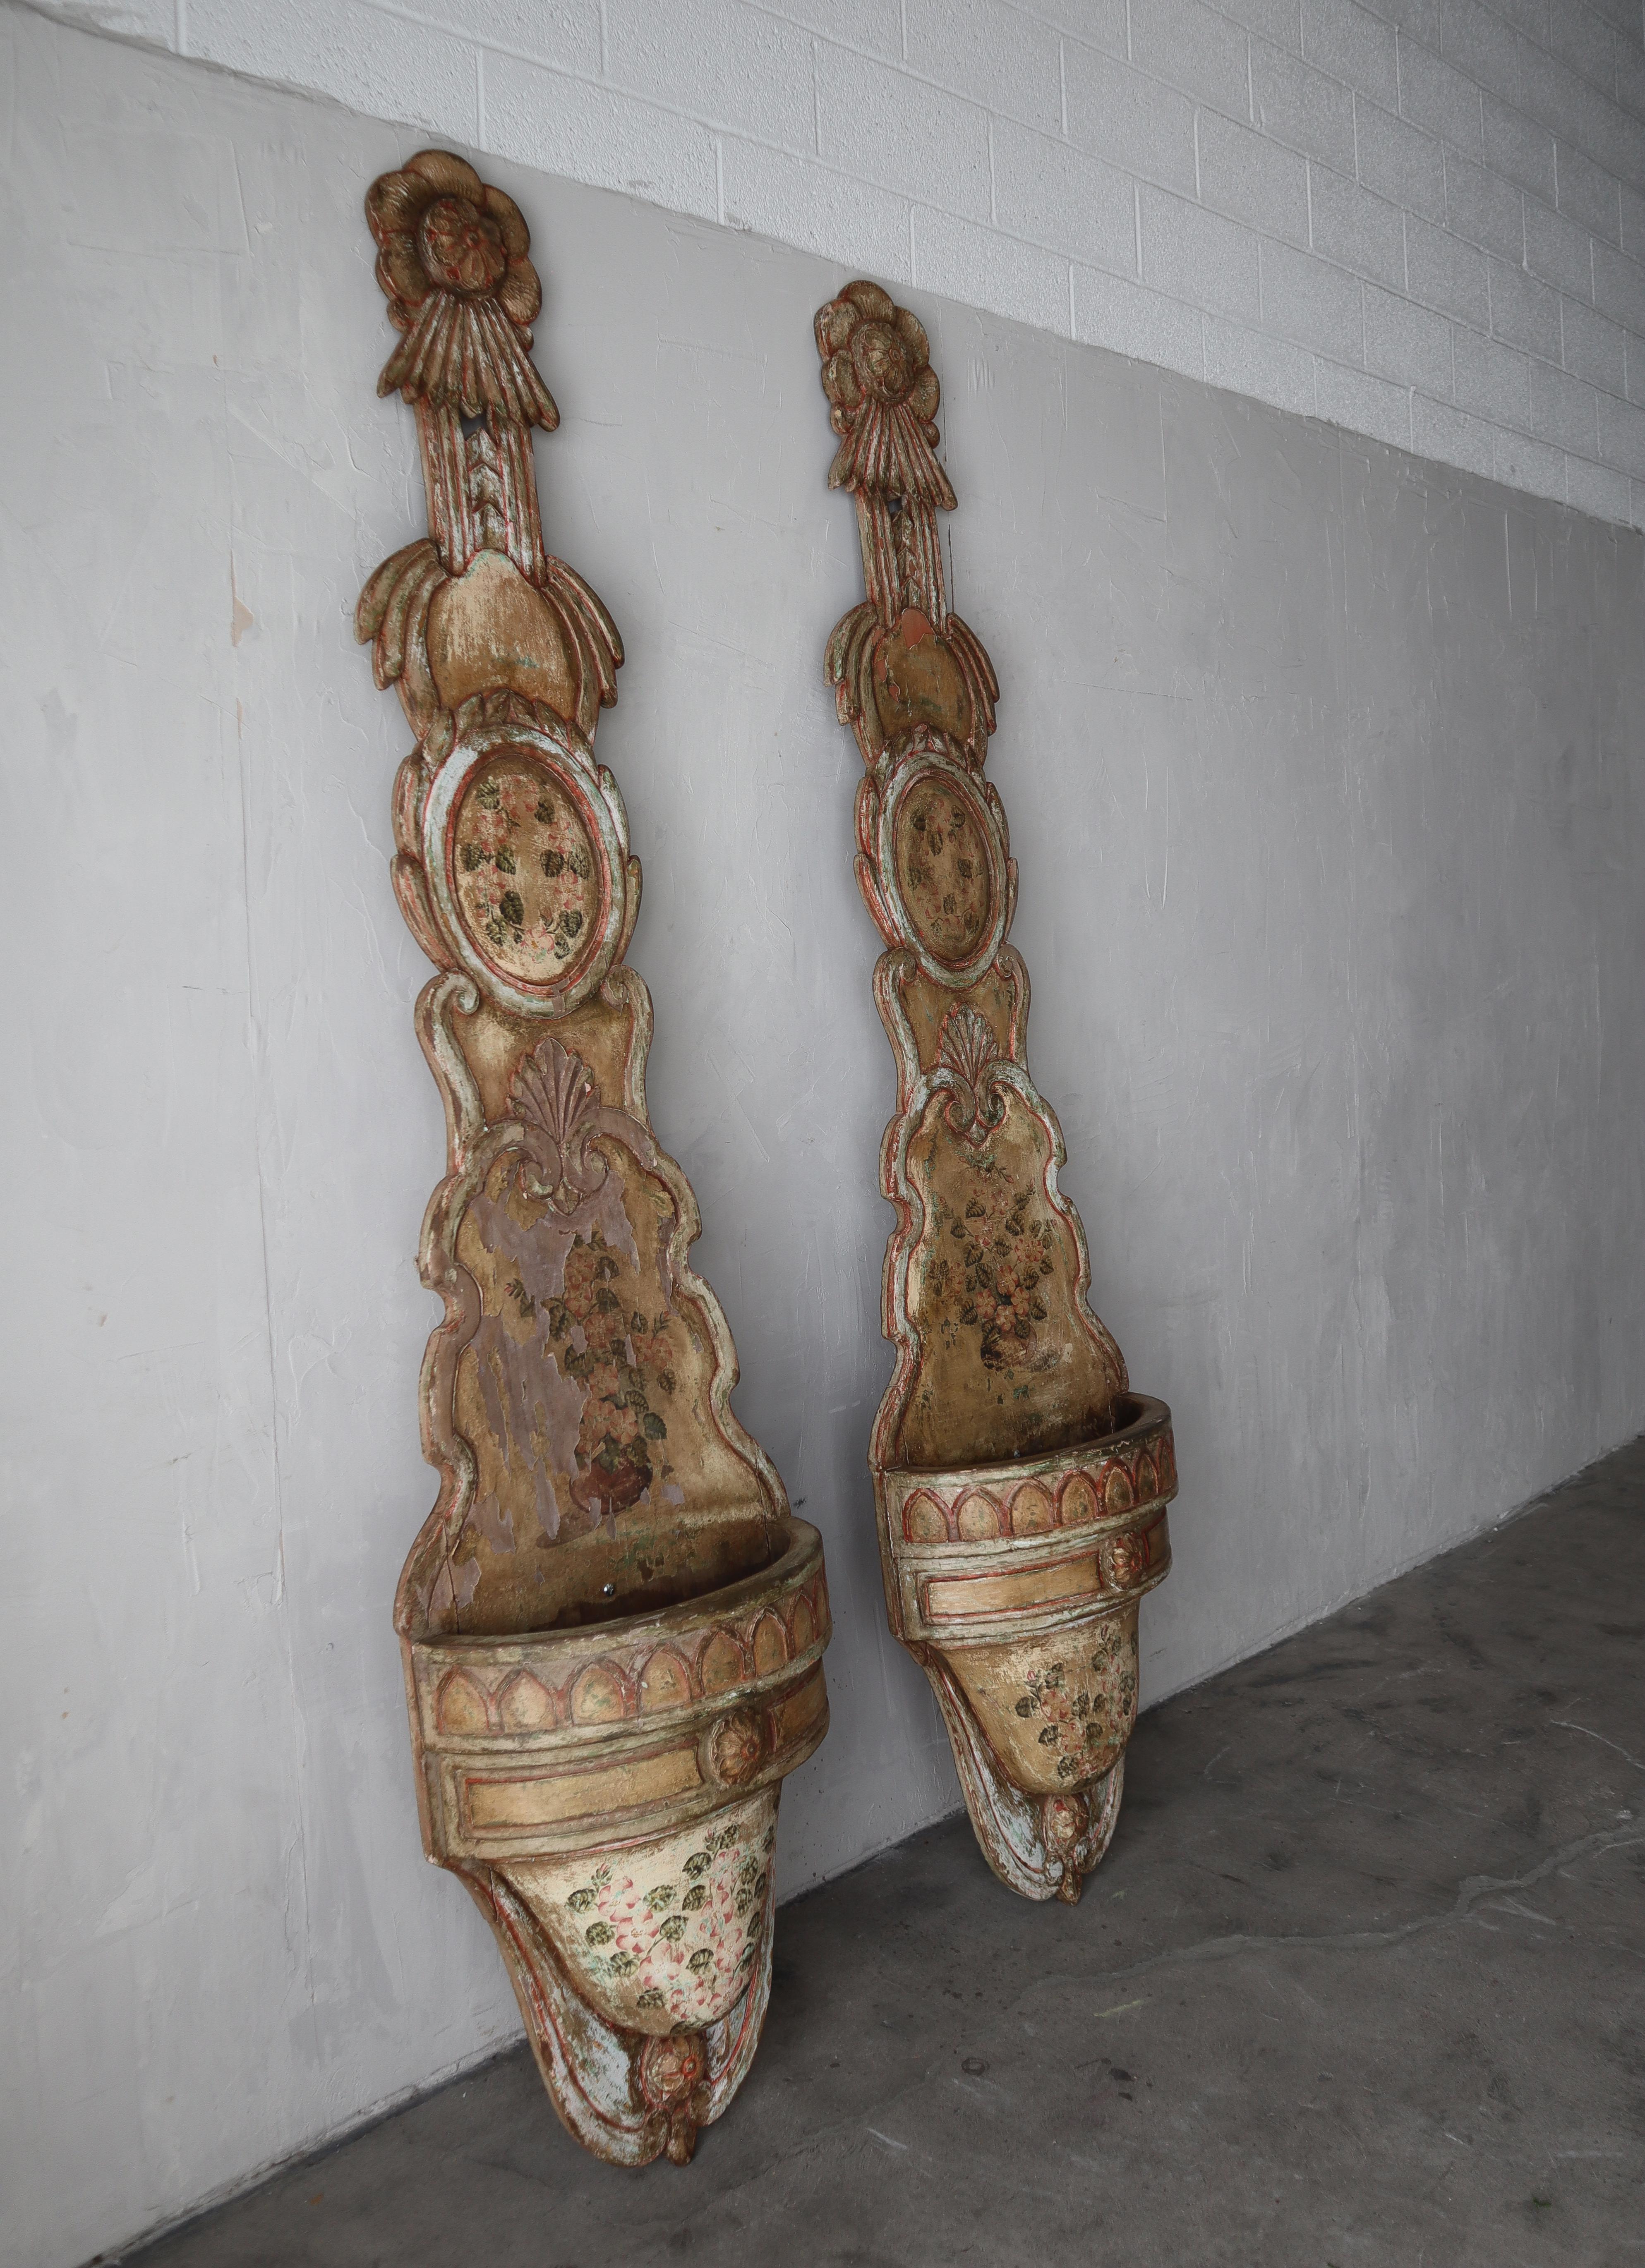 8ft Tall Pair of Antique European Wood Jardiniere Planters For Sale 1